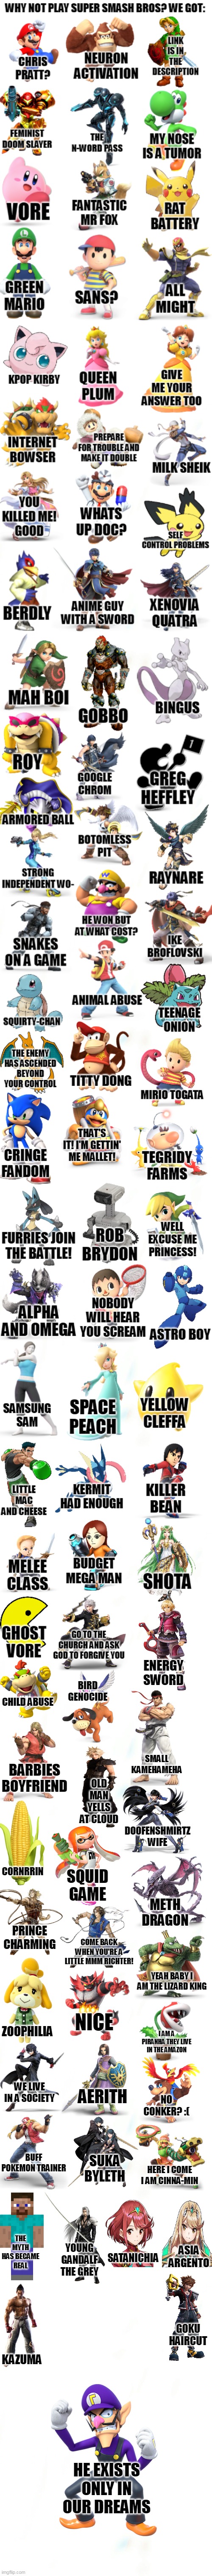 why not play SSBU? | image tagged in memes,funny,super smash bros | made w/ Imgflip meme maker